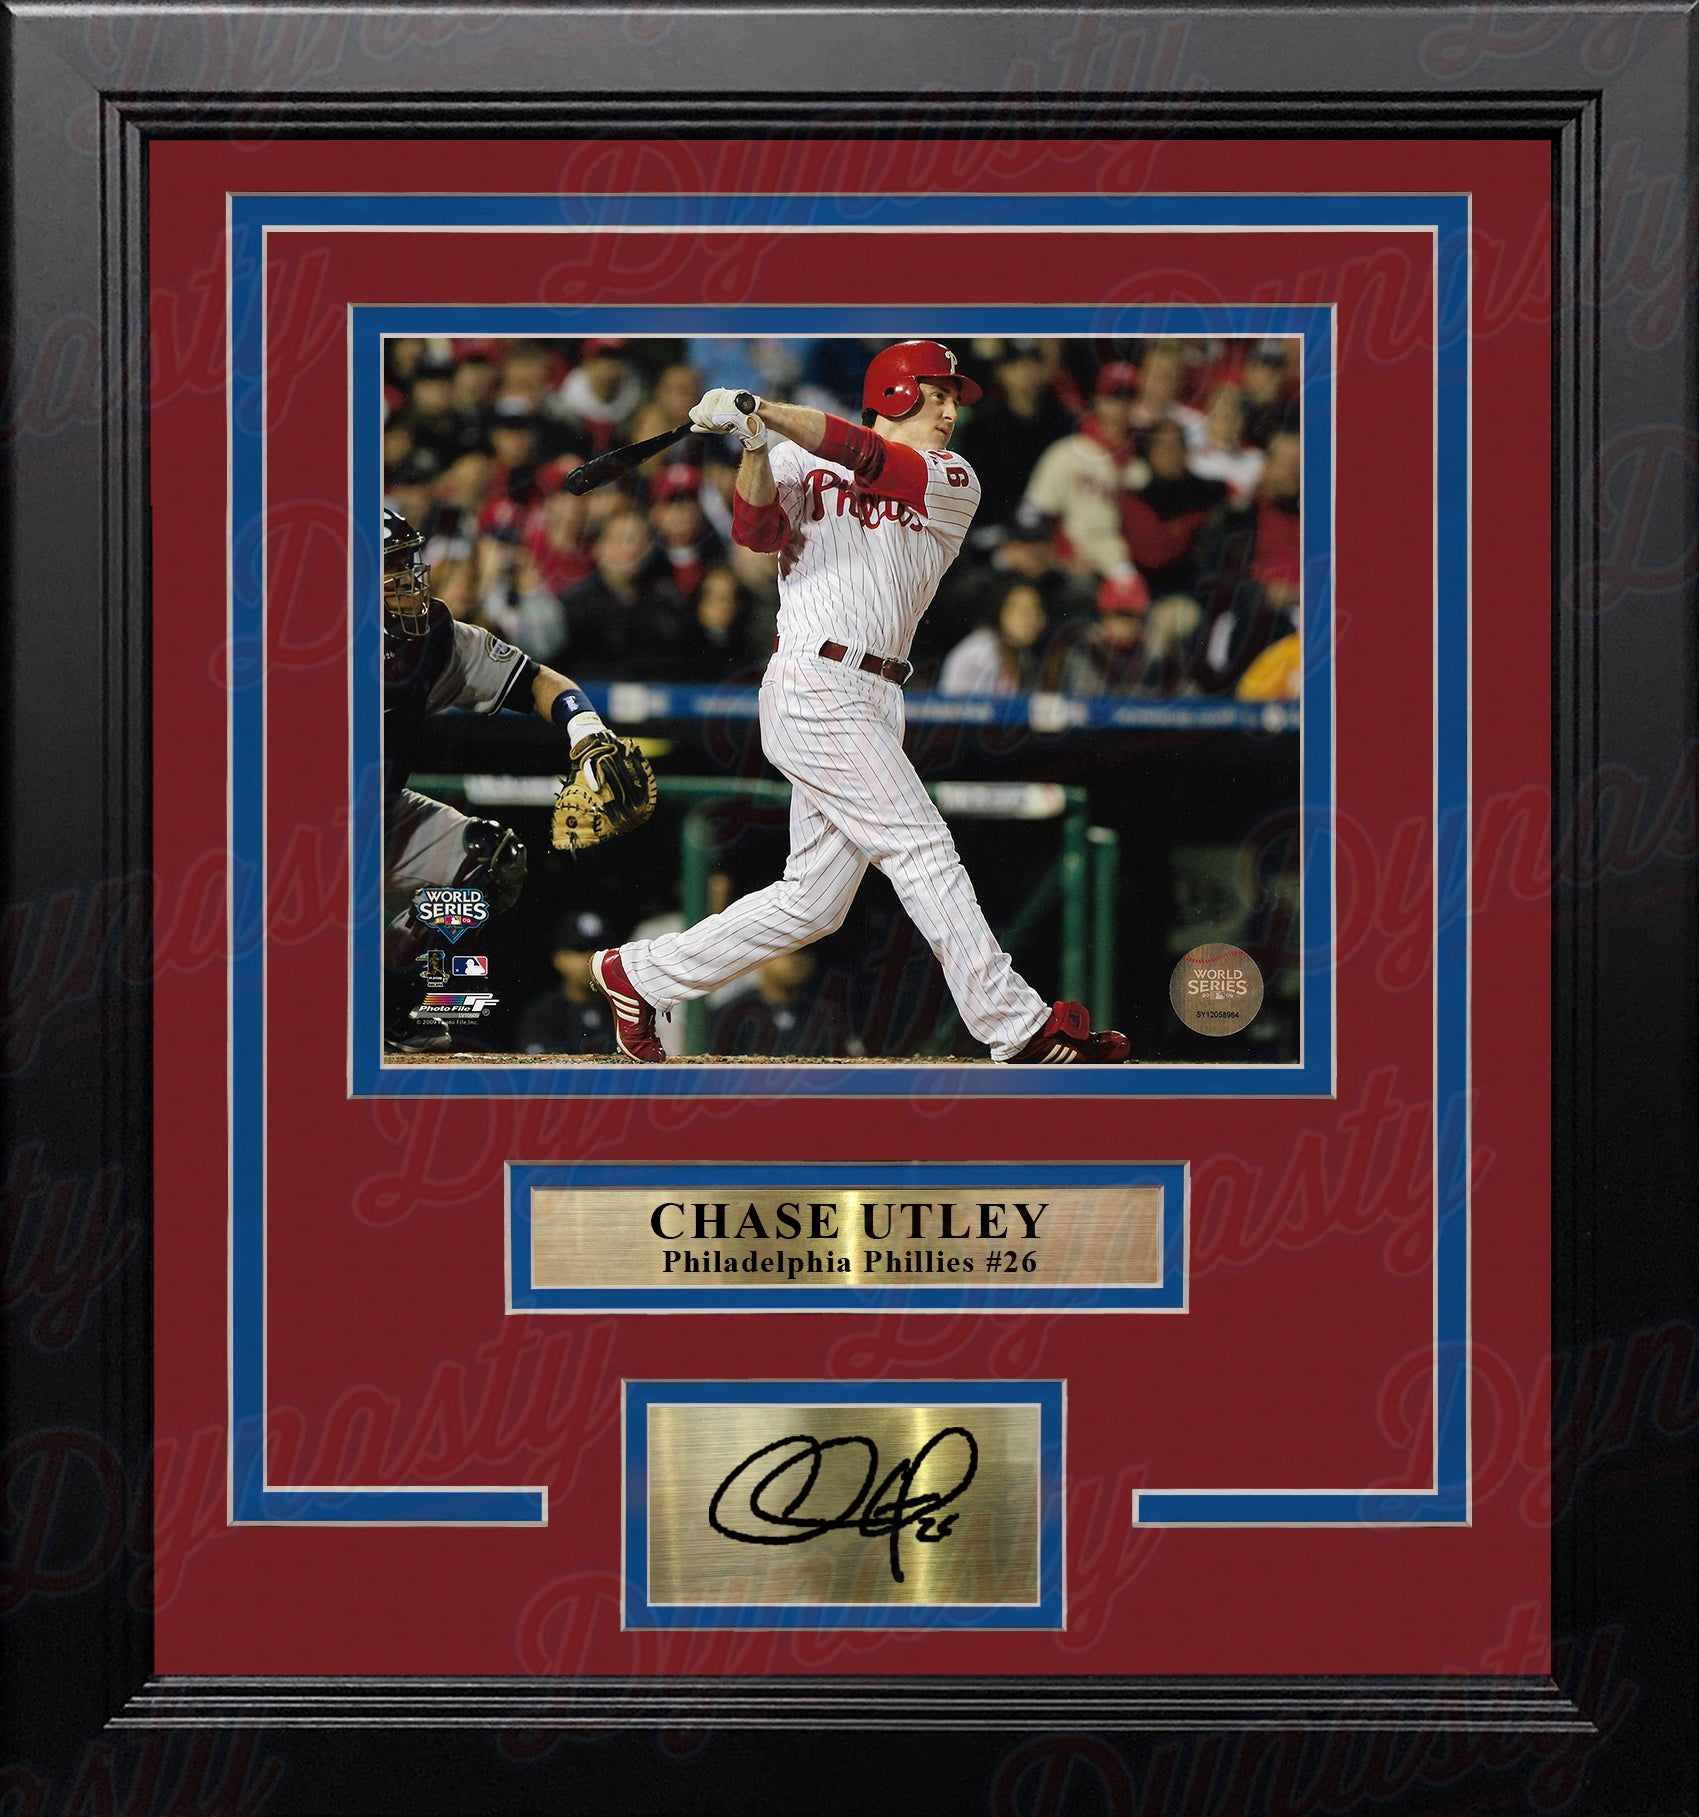 Chase Utley World Series Action Philadelphia Phillies 8x10 Framed Photo  with Engraved Autograph - Dynasty Sports & Framing